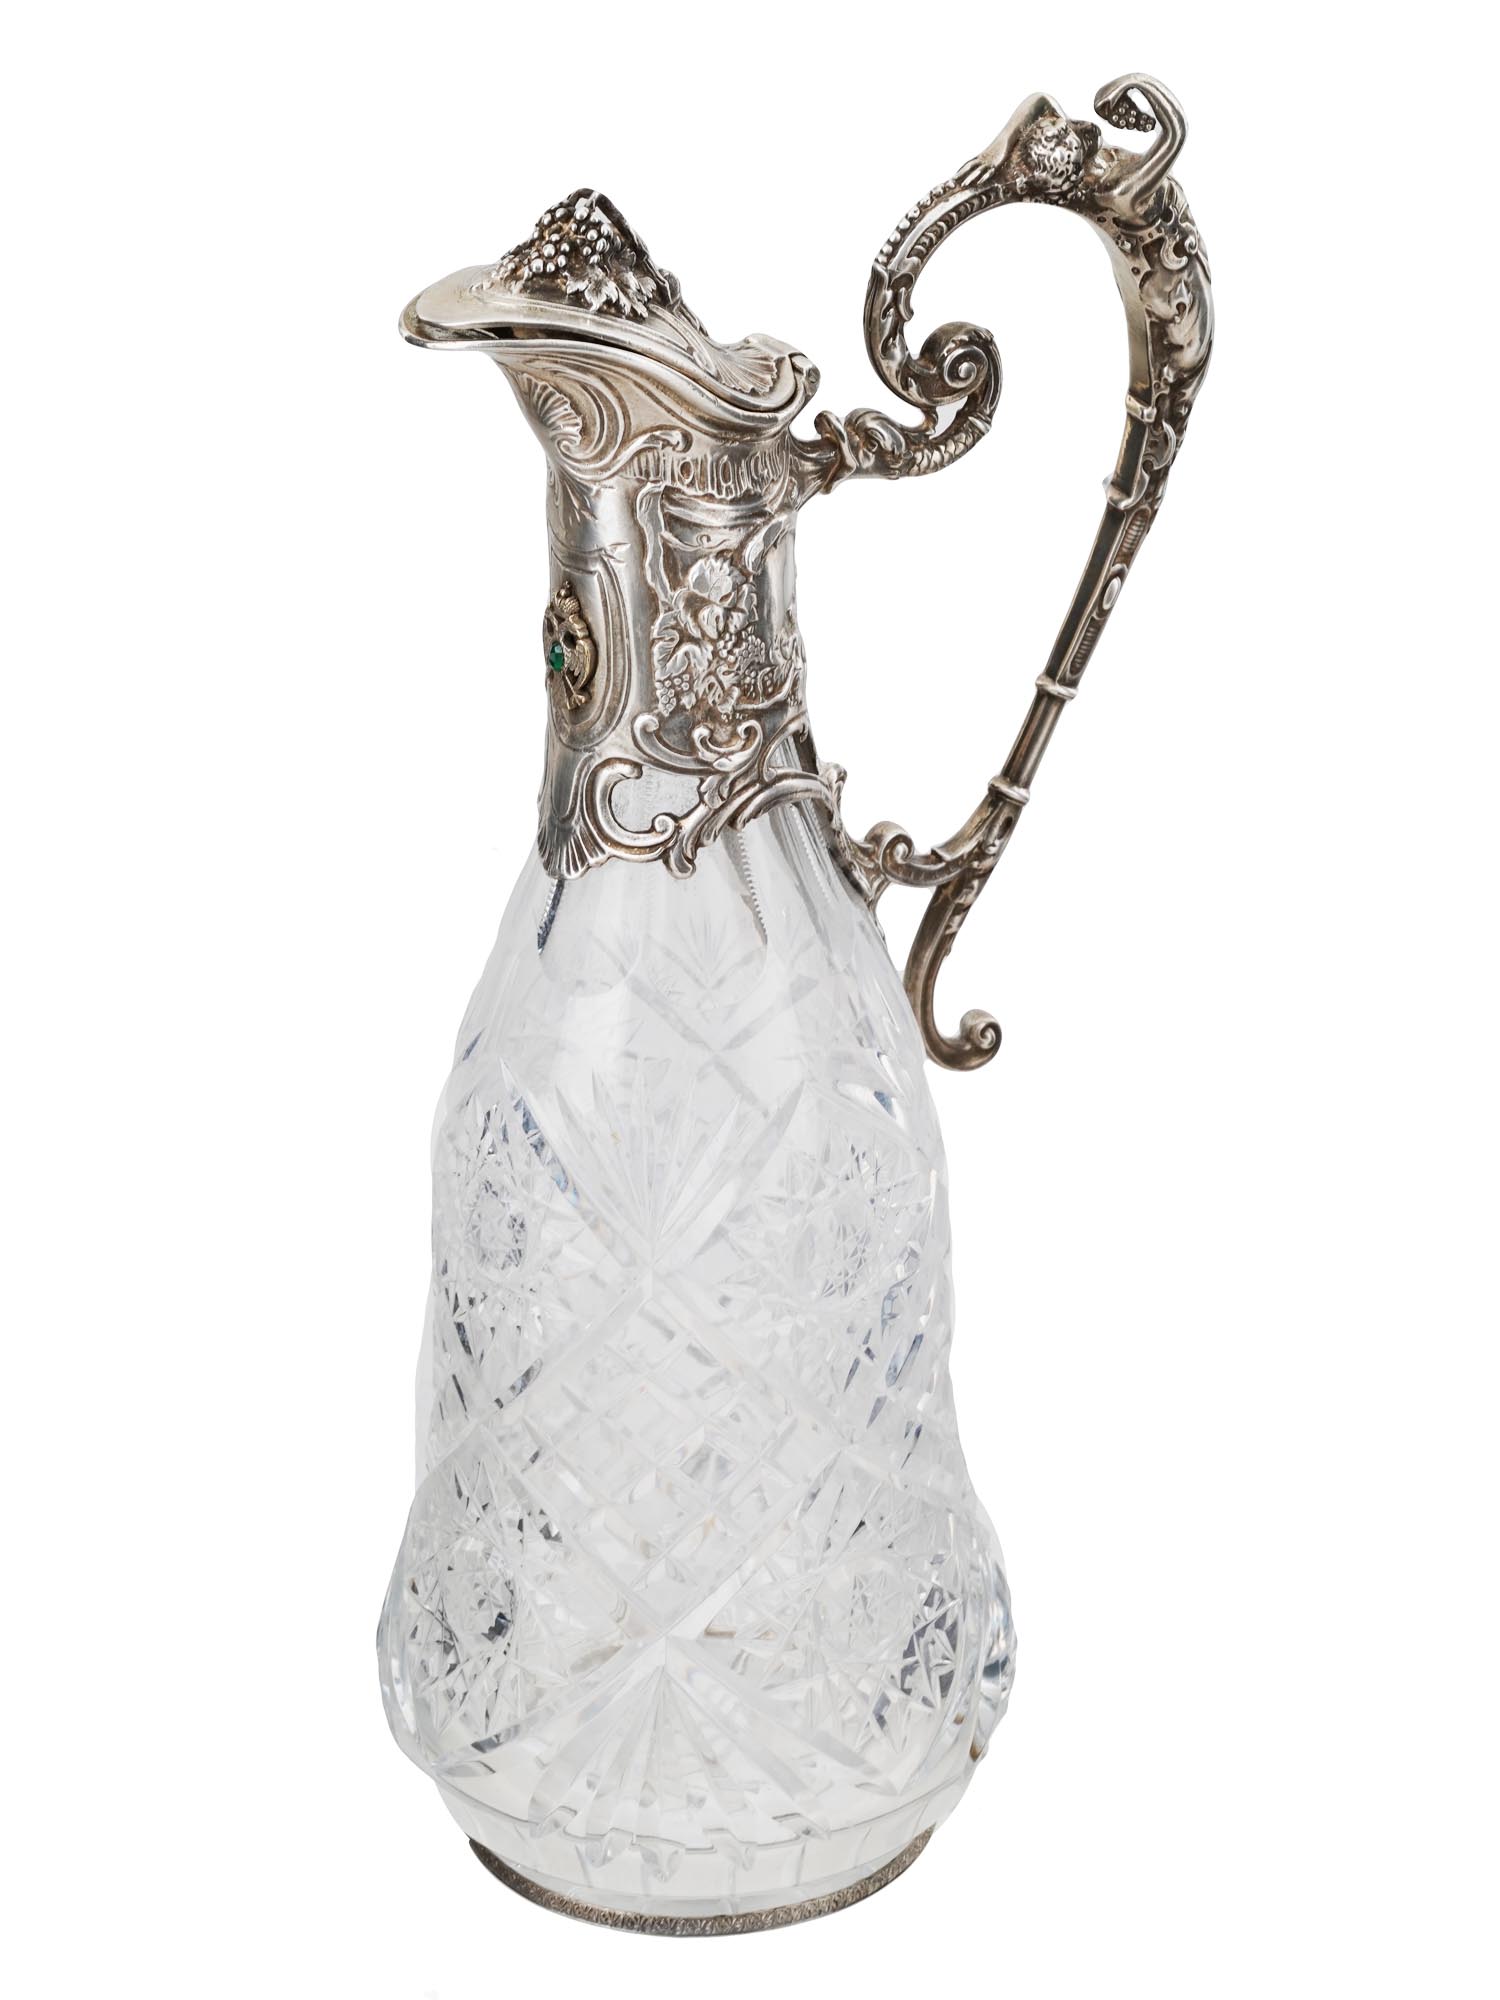 RUSSIAN 84 SILVER AND CUT CRYSTAL DECANTER PIC-0